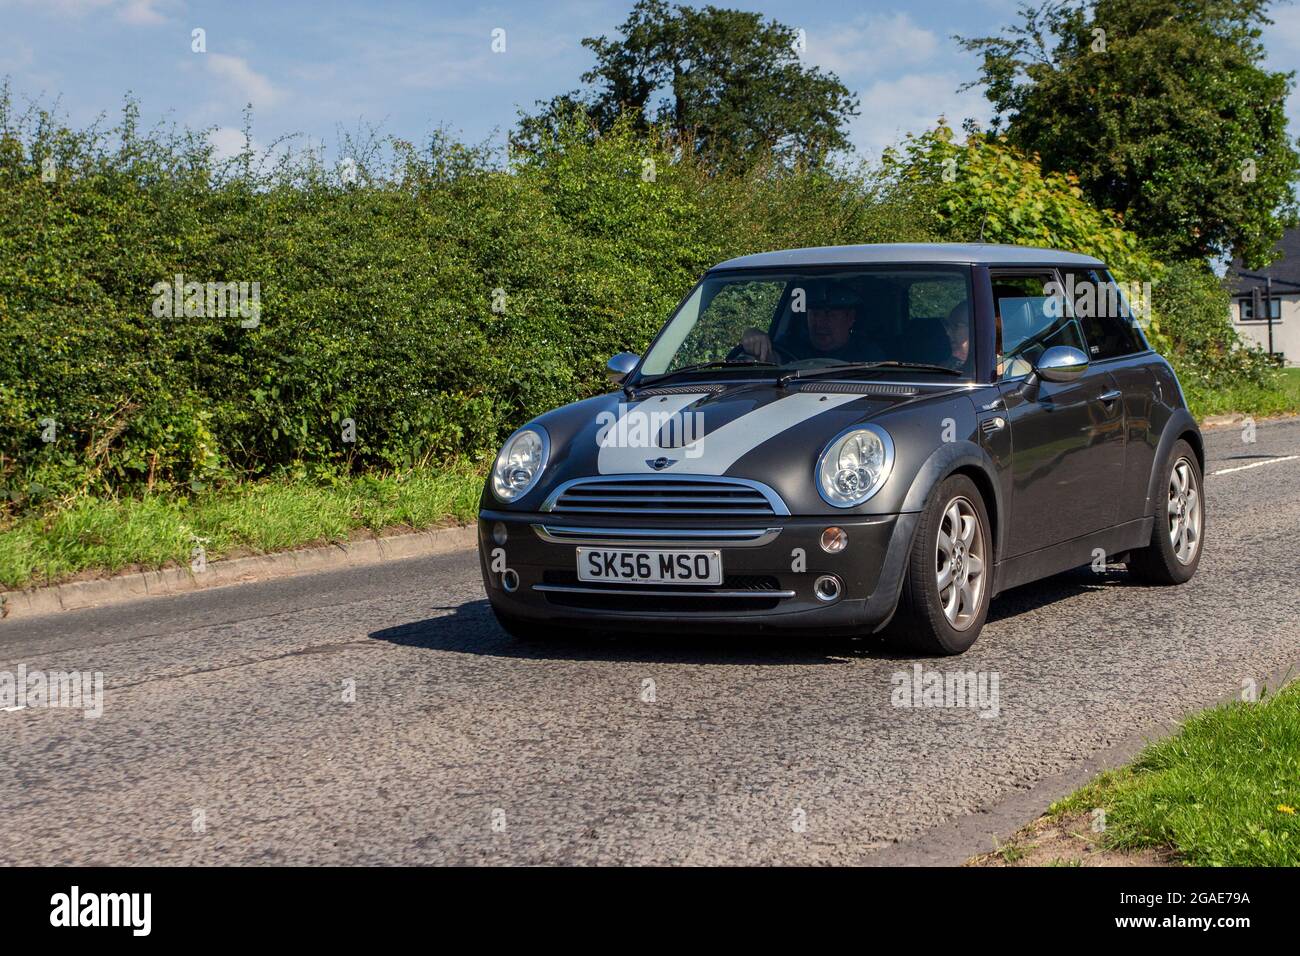 2006 grey British Mini Cooper Park Lane 1598cc petrol hatchback en-route to Capesthorne Hall classic July car show, Cheshire, UK Stock Photo